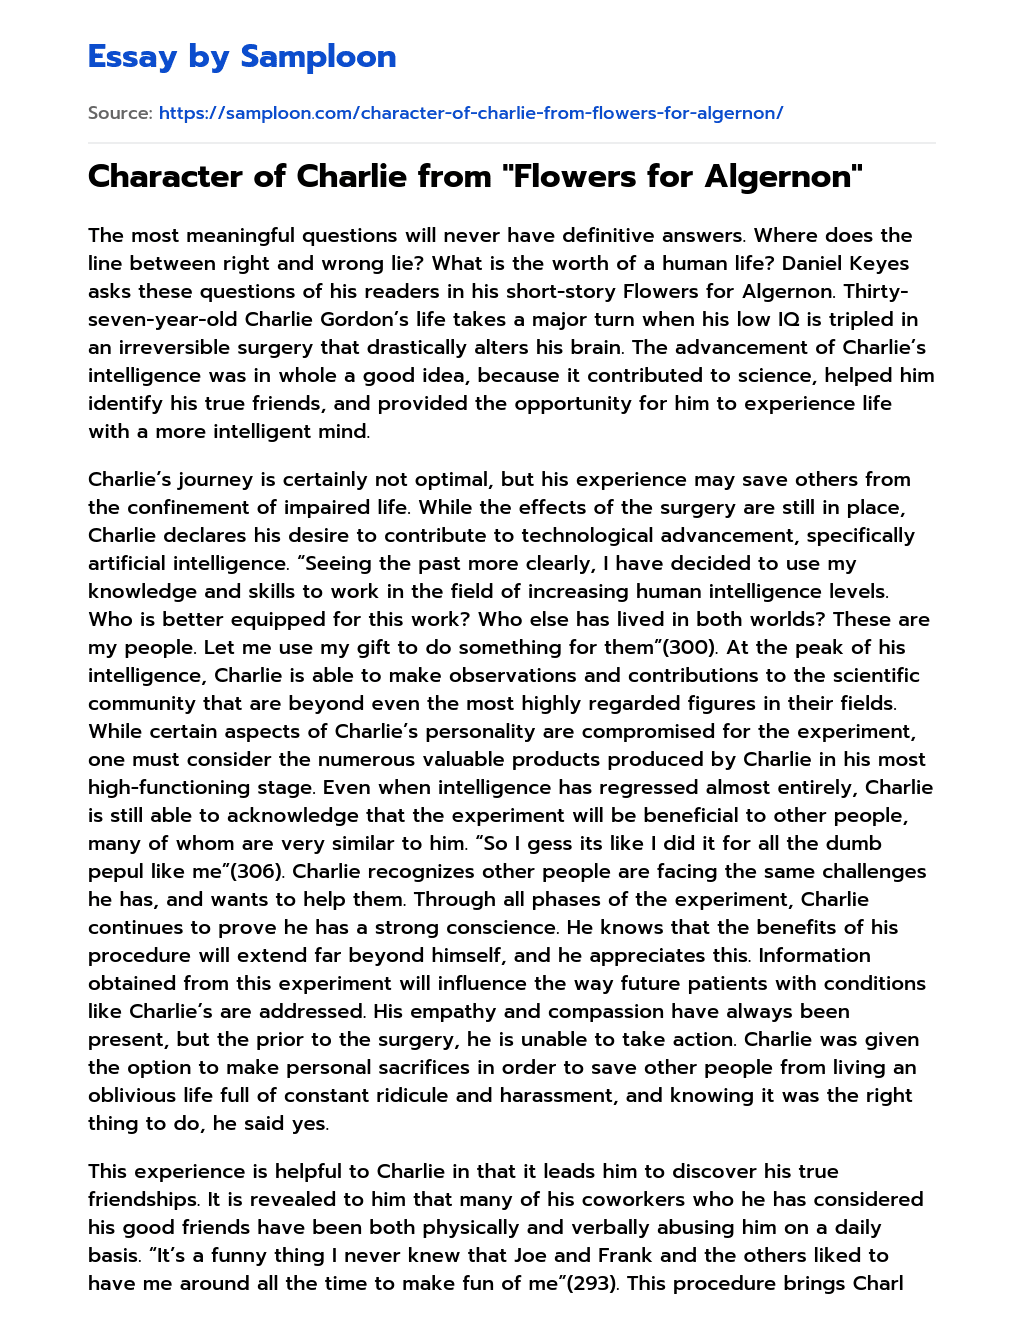 Character of Charlie from “Flowers for Algernon” essay